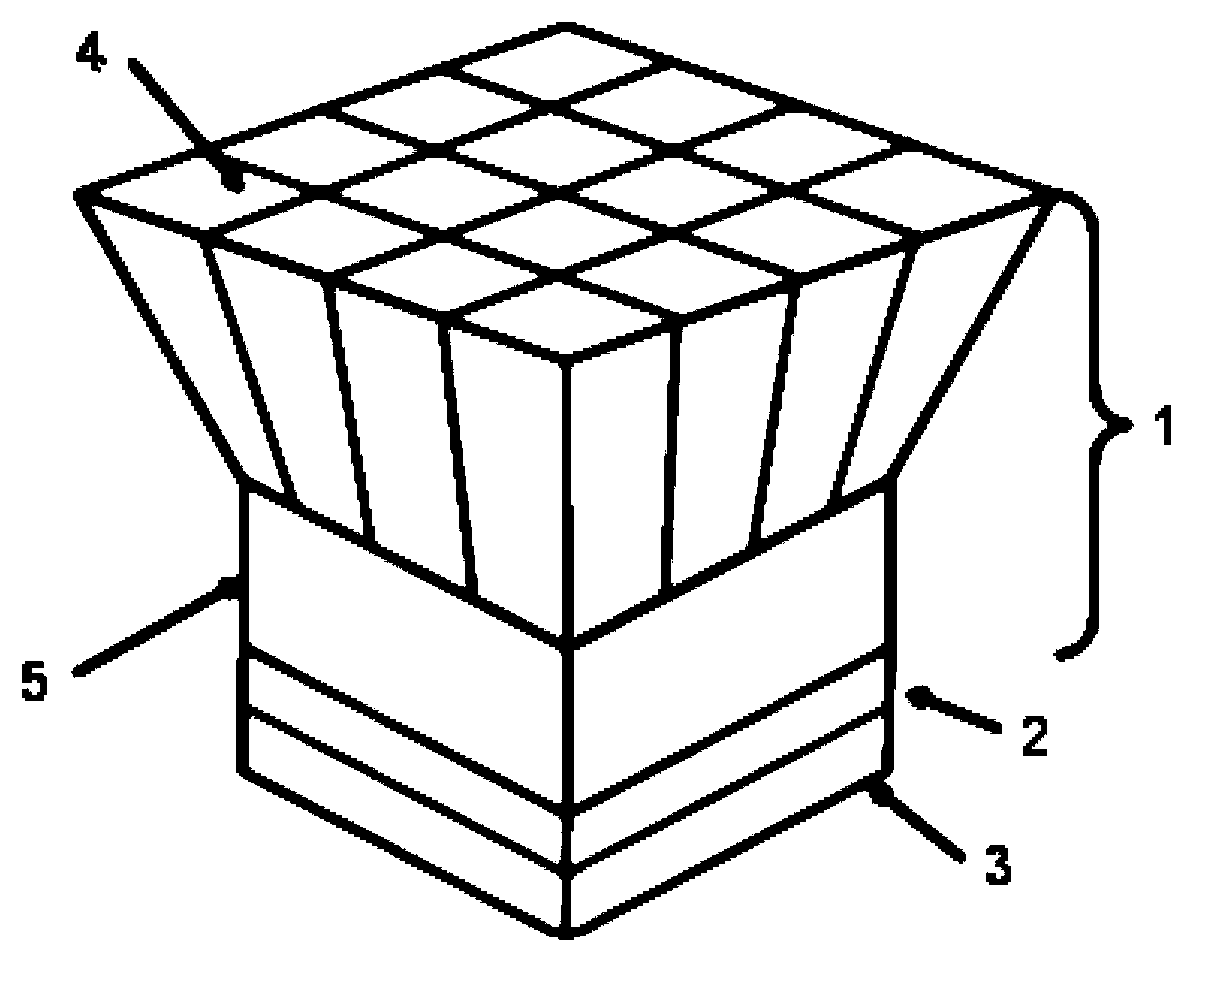 Multilayer scintillation crystal and PET prober